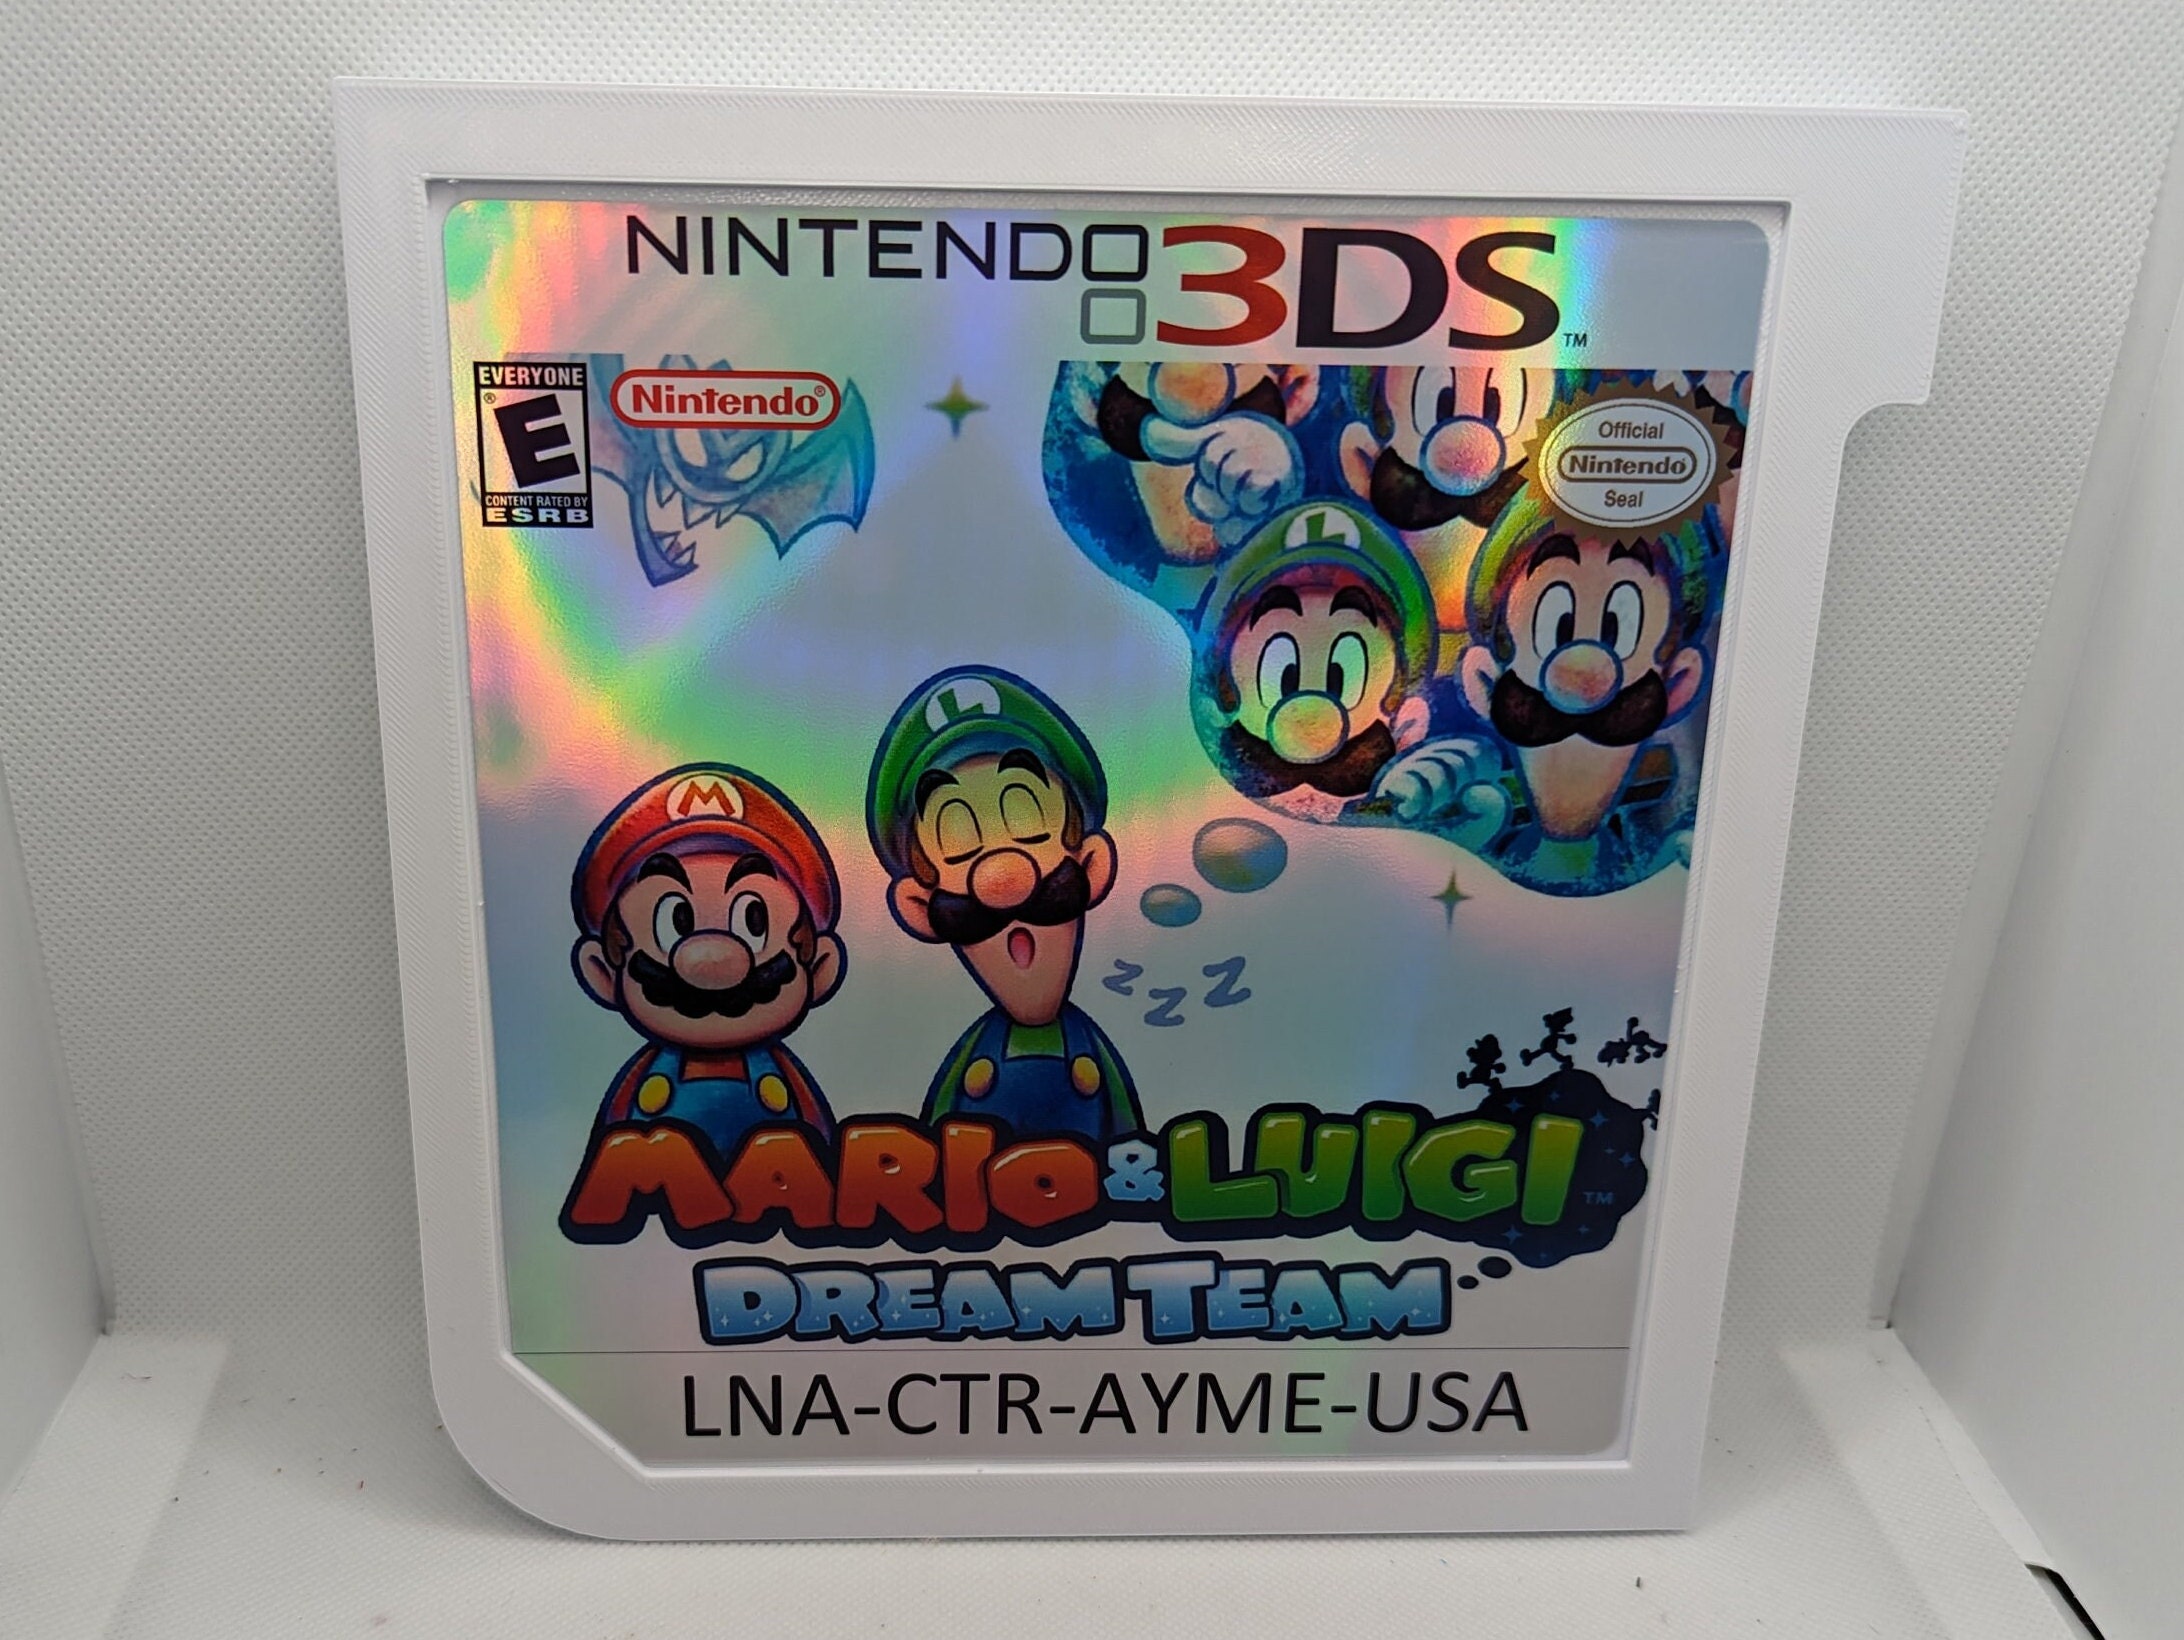 I Do Love The Mario And Luigi Games On 3DS But What Order Are They Supposed  To Be Played In? : r/3DS